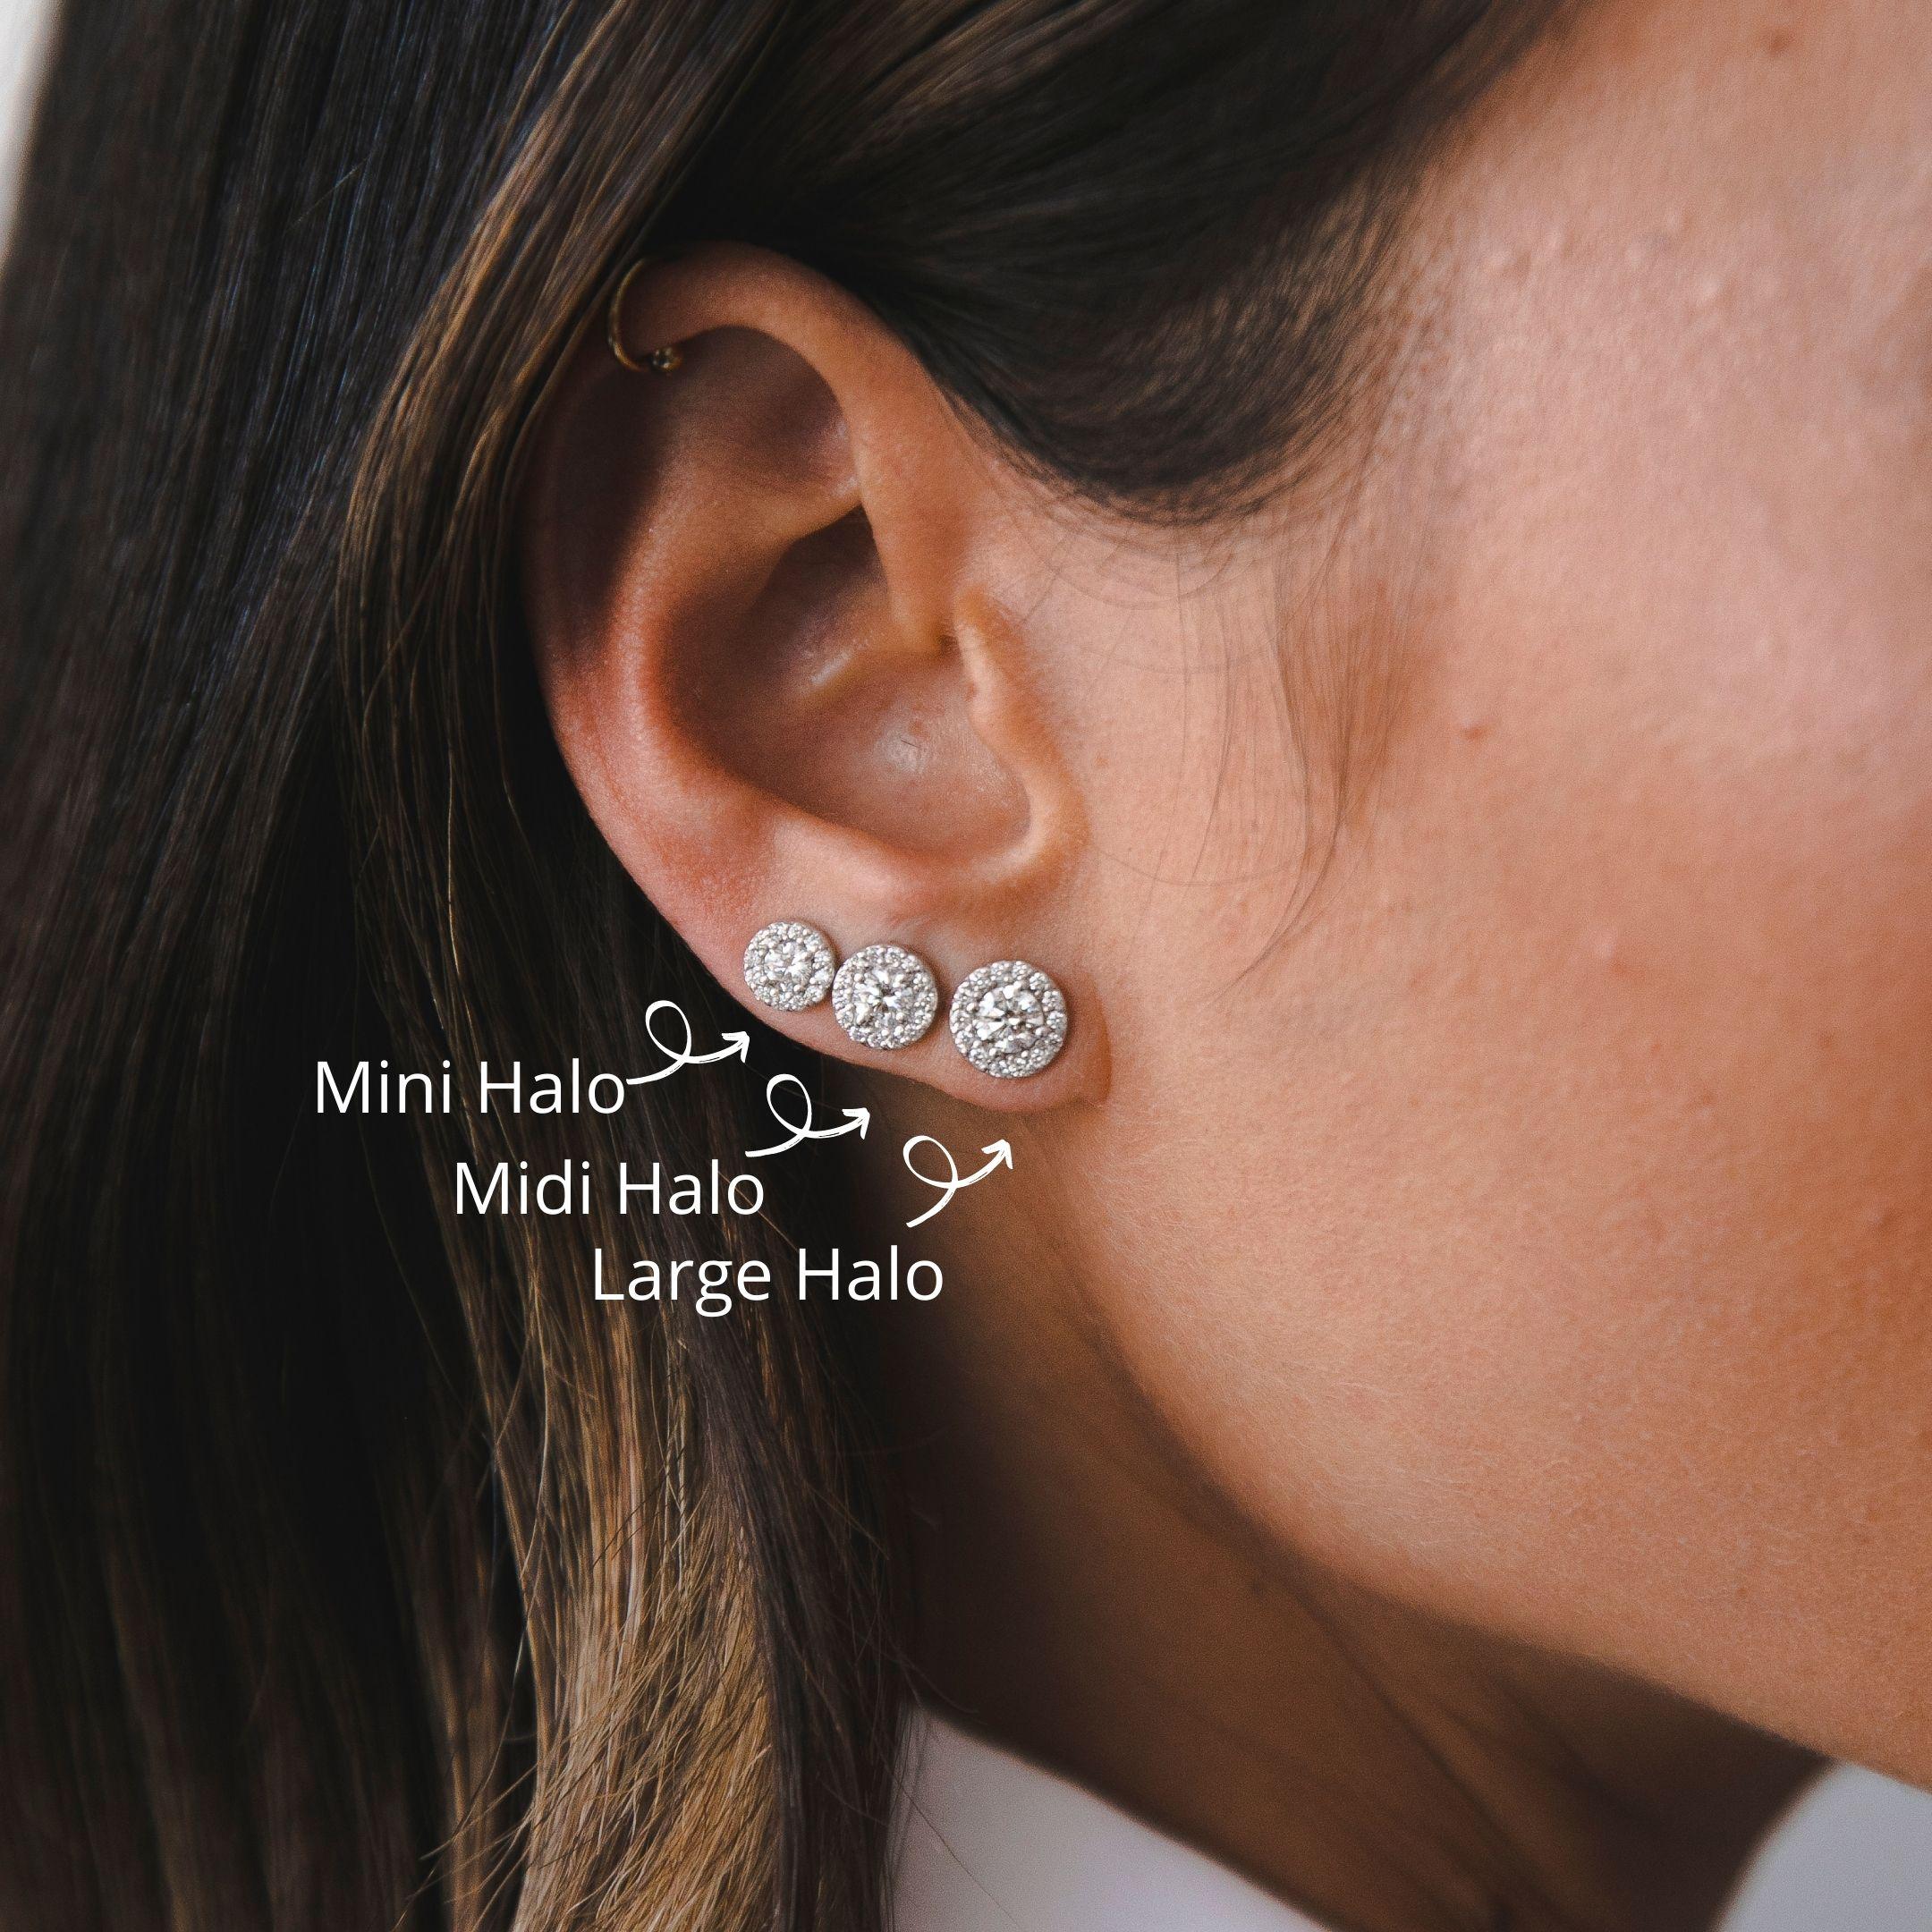 0.38 Carat Diamond Mini Halo Earrings in 14 Karat White Gold - Shlomit Rogel

A beautiful and classic halo design, these mini stud earrings feature shiny genuine diamonds totaling 0.38 carat. Timeless and chic, these earrings will compliment any